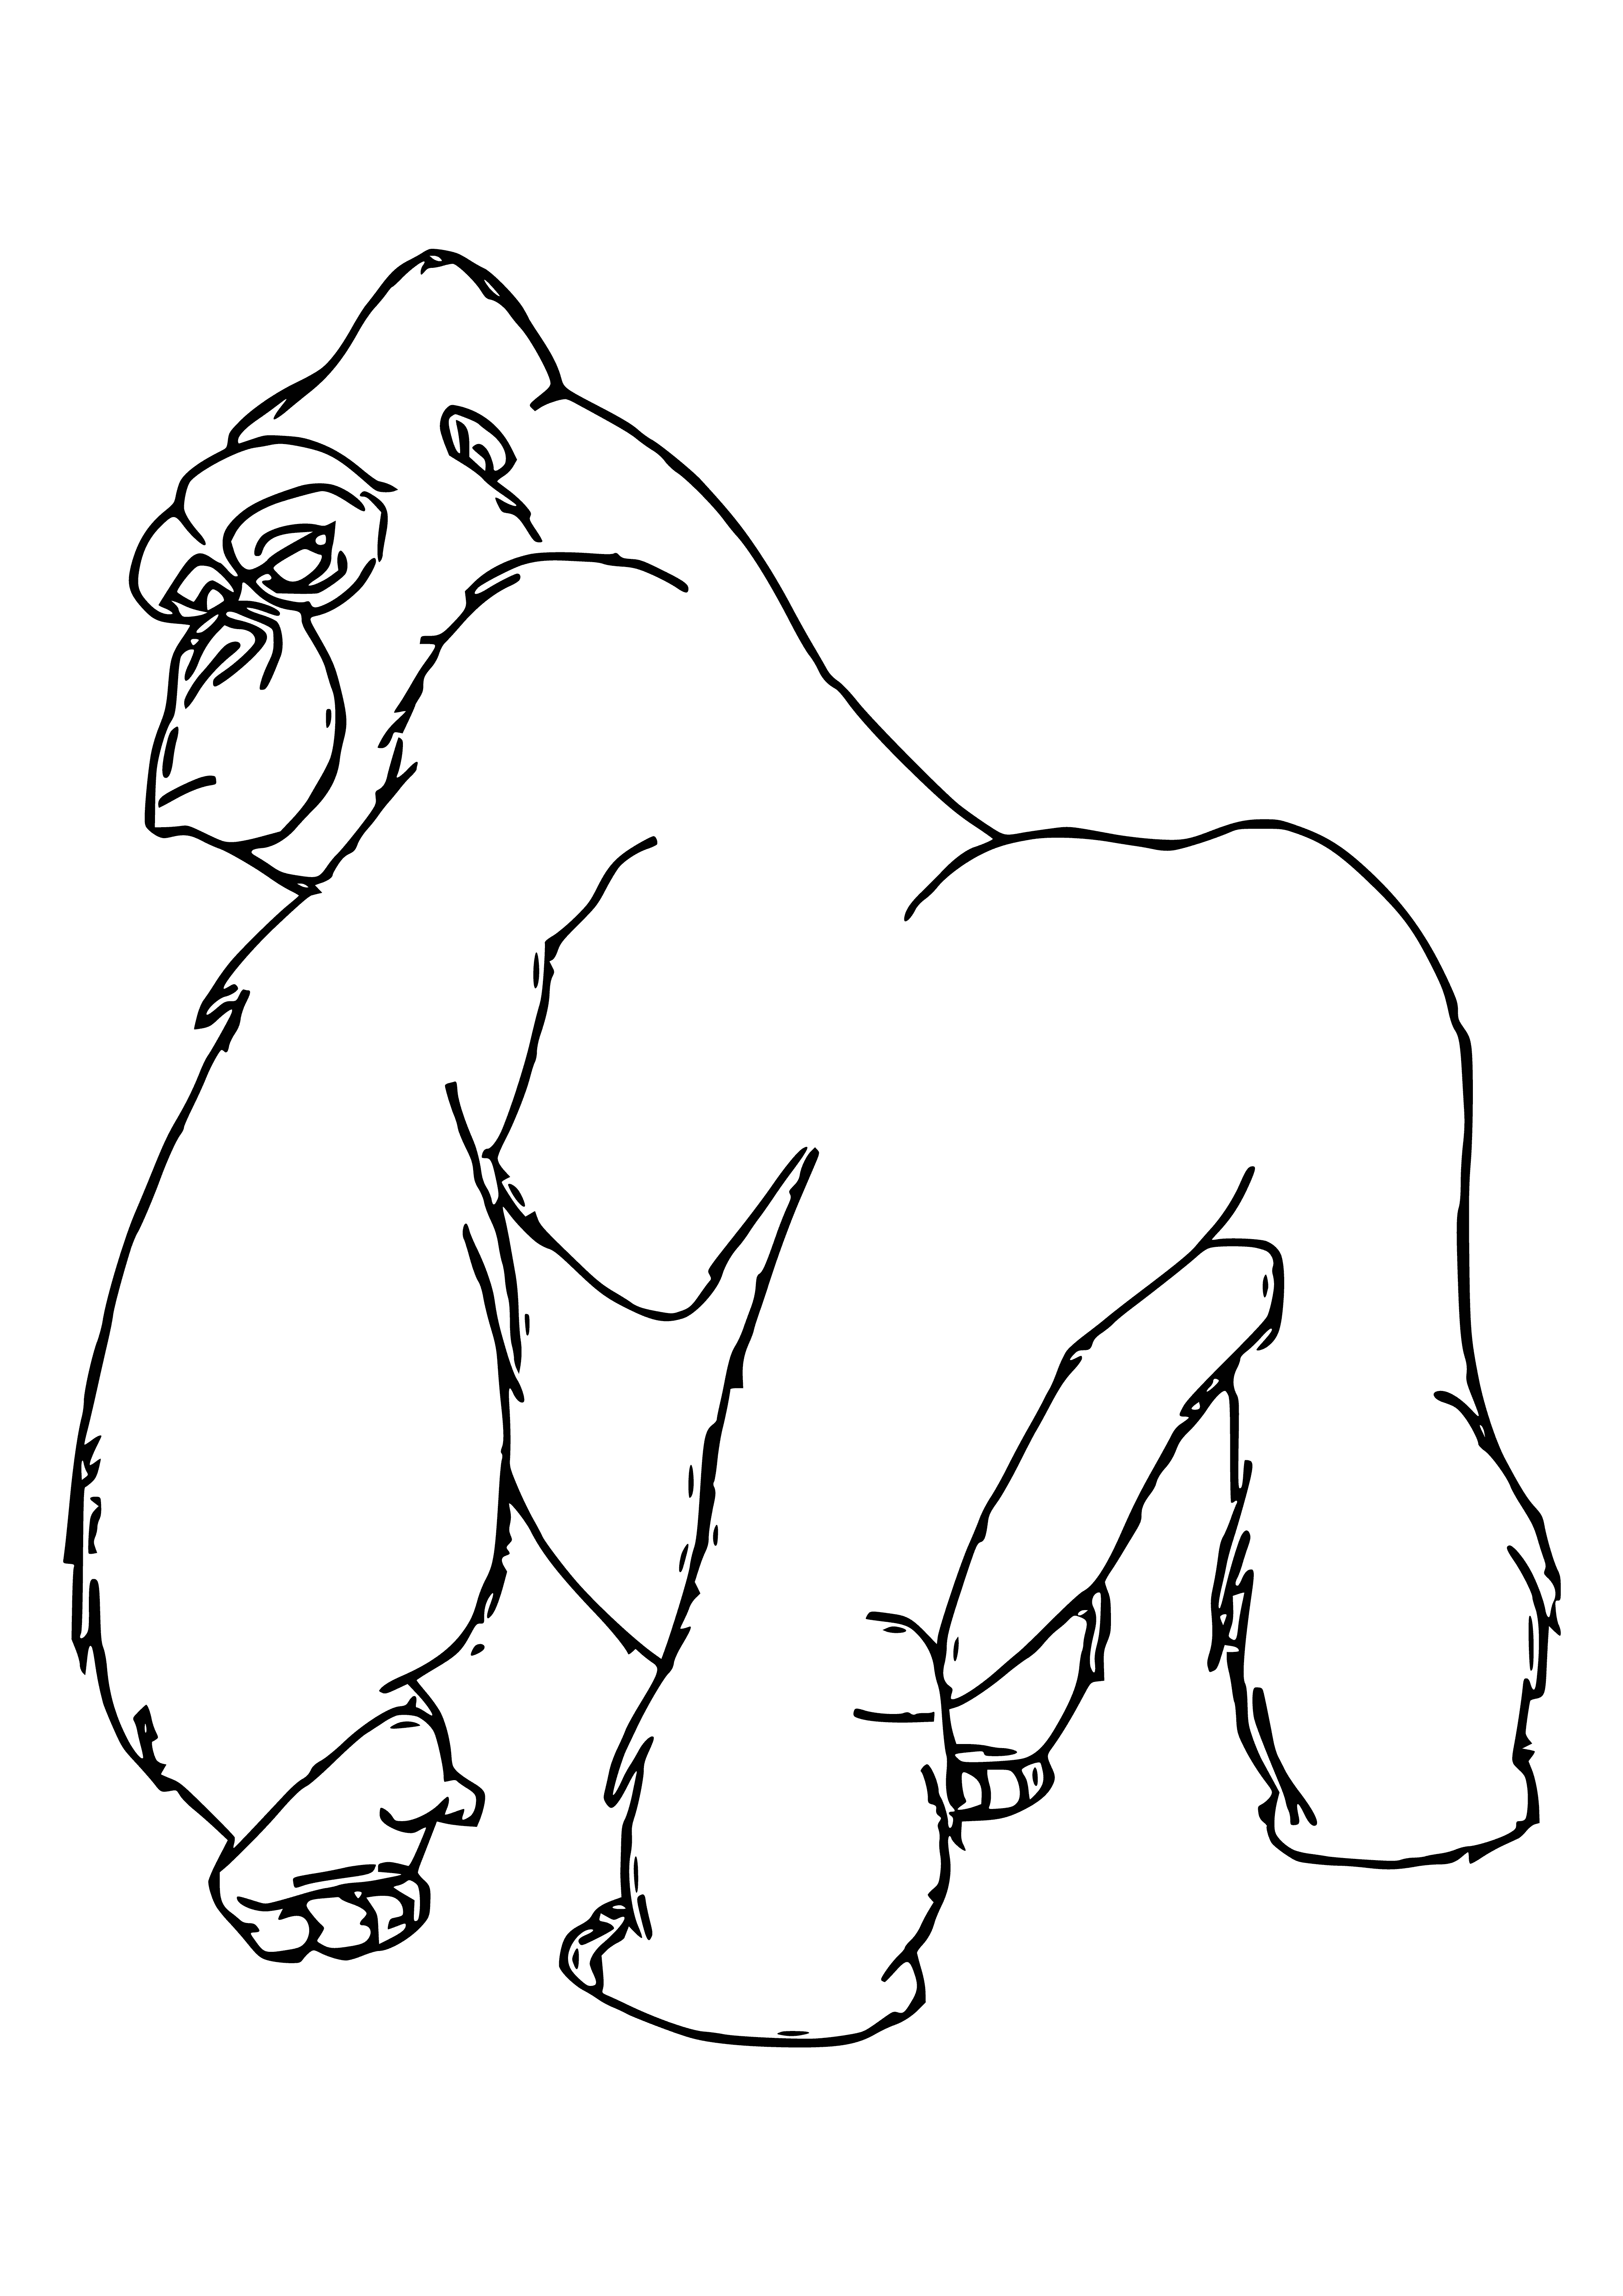 coloring page: Kerchak is a large male gorilla with dark brown fur, a silverback, muscular arms and legs, a long tail, brown eyes, and wrinkles on his face, implying a wise, elderly look.